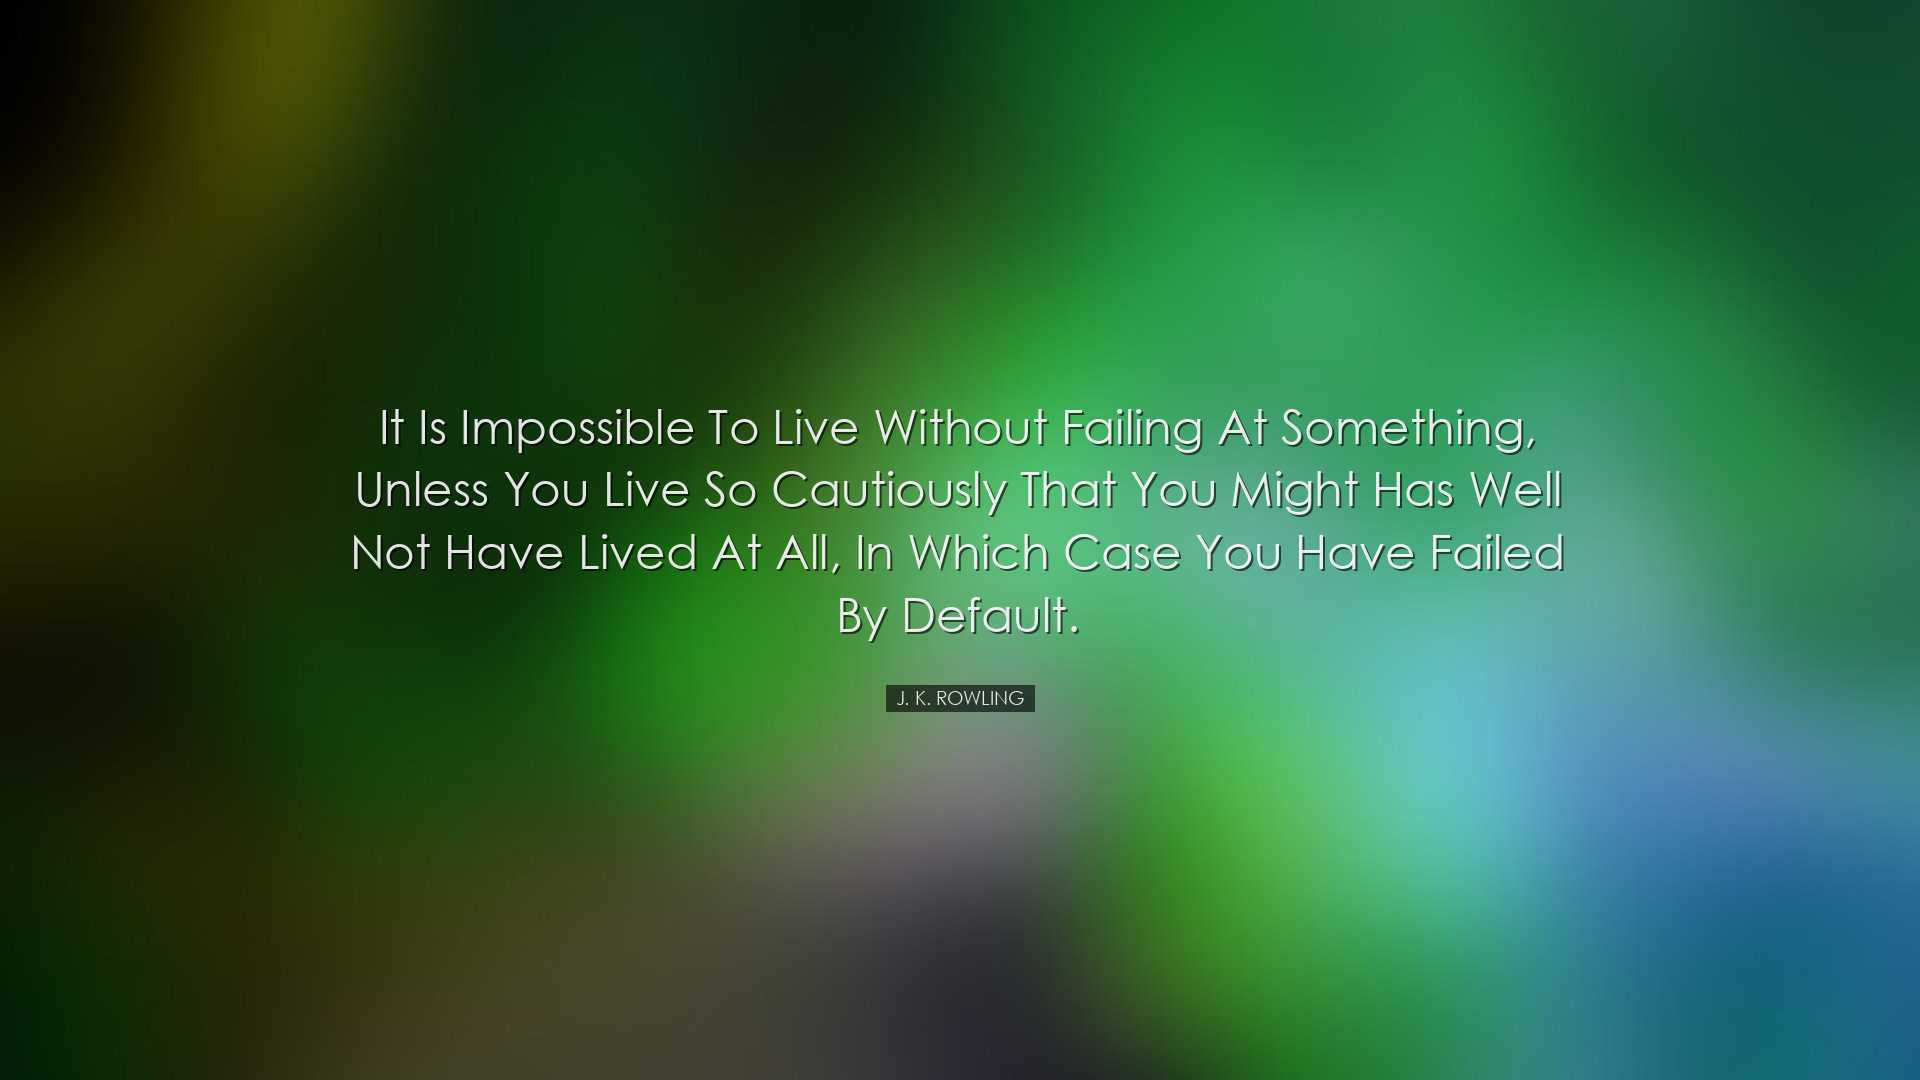 It is impossible to live without failing at something, unless you